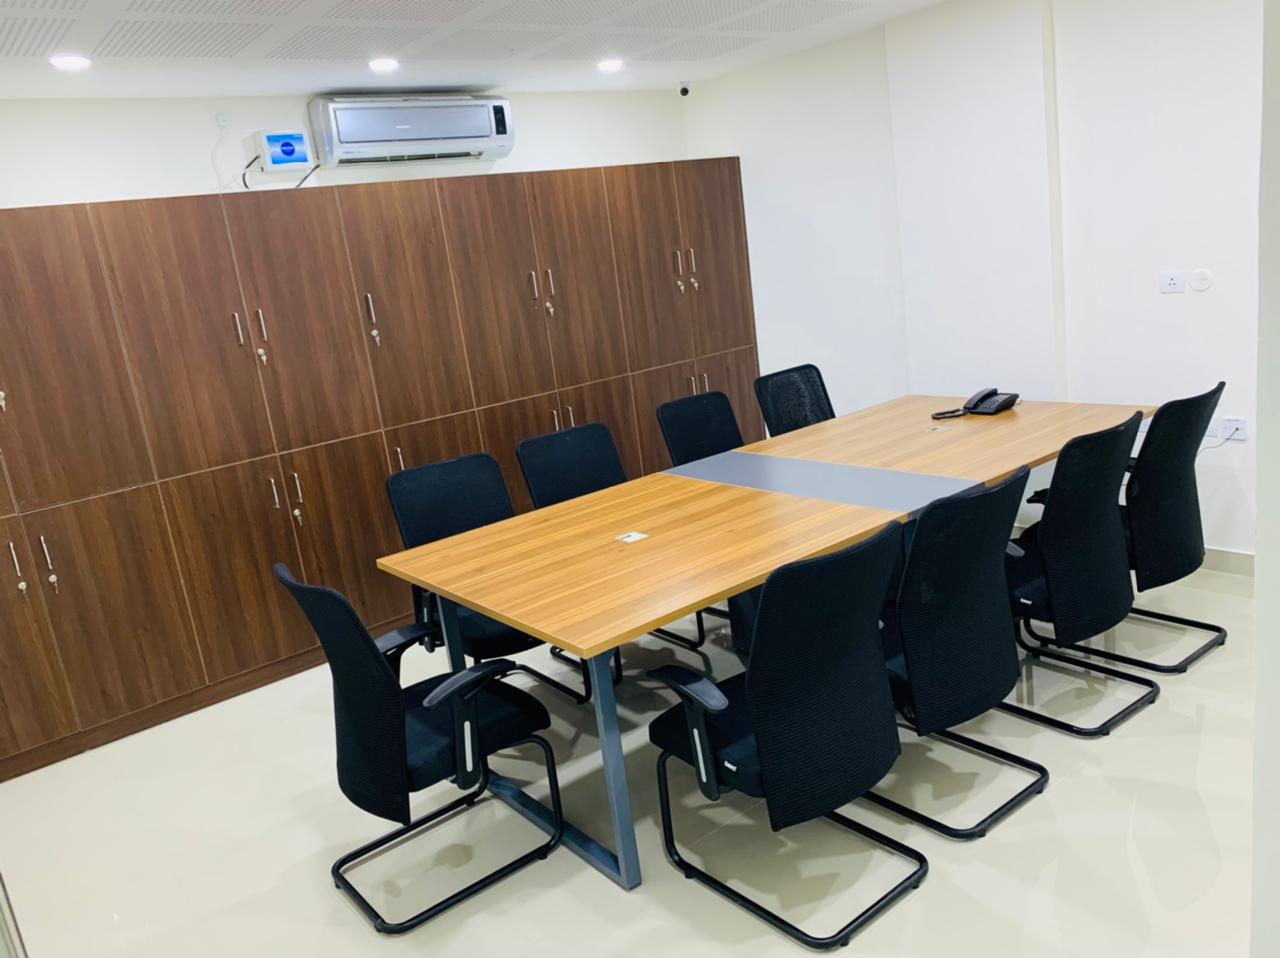 Conference table with black chairs